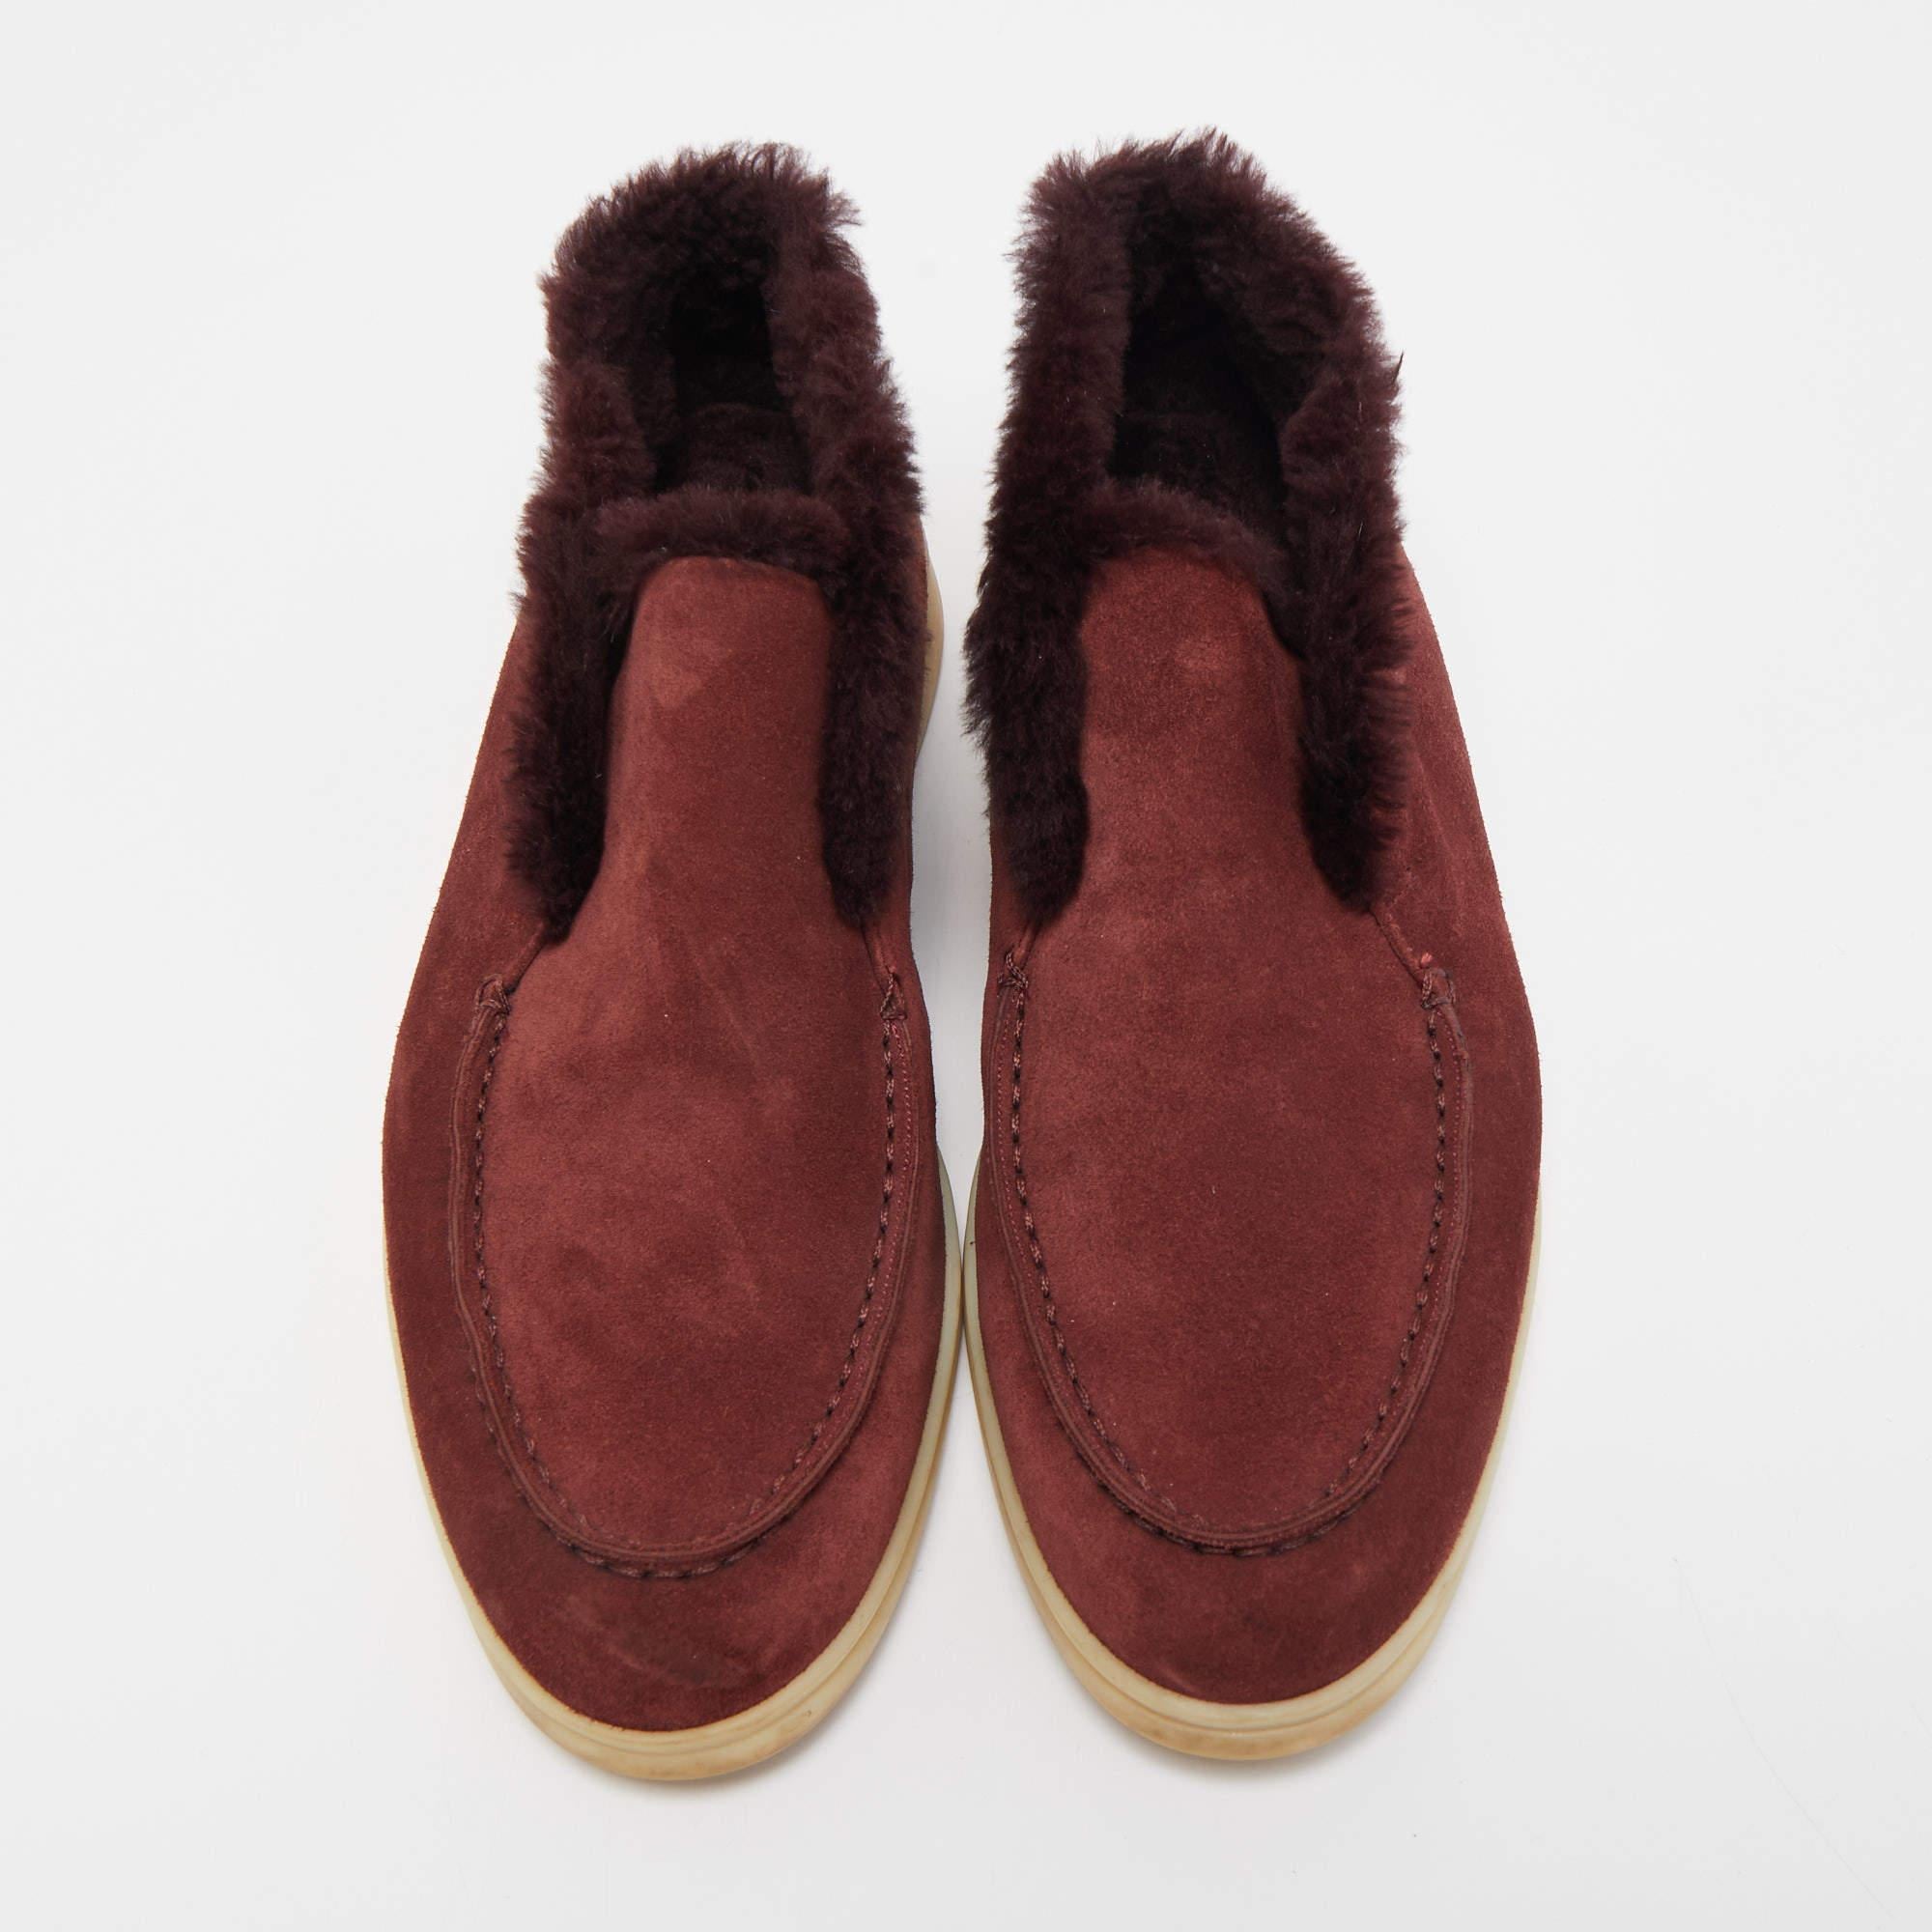 Bringing together comfort and style are these Open Walk Chukka boots from Loro Piana! The burgundy boots are crafted from suede and styled with fur.

